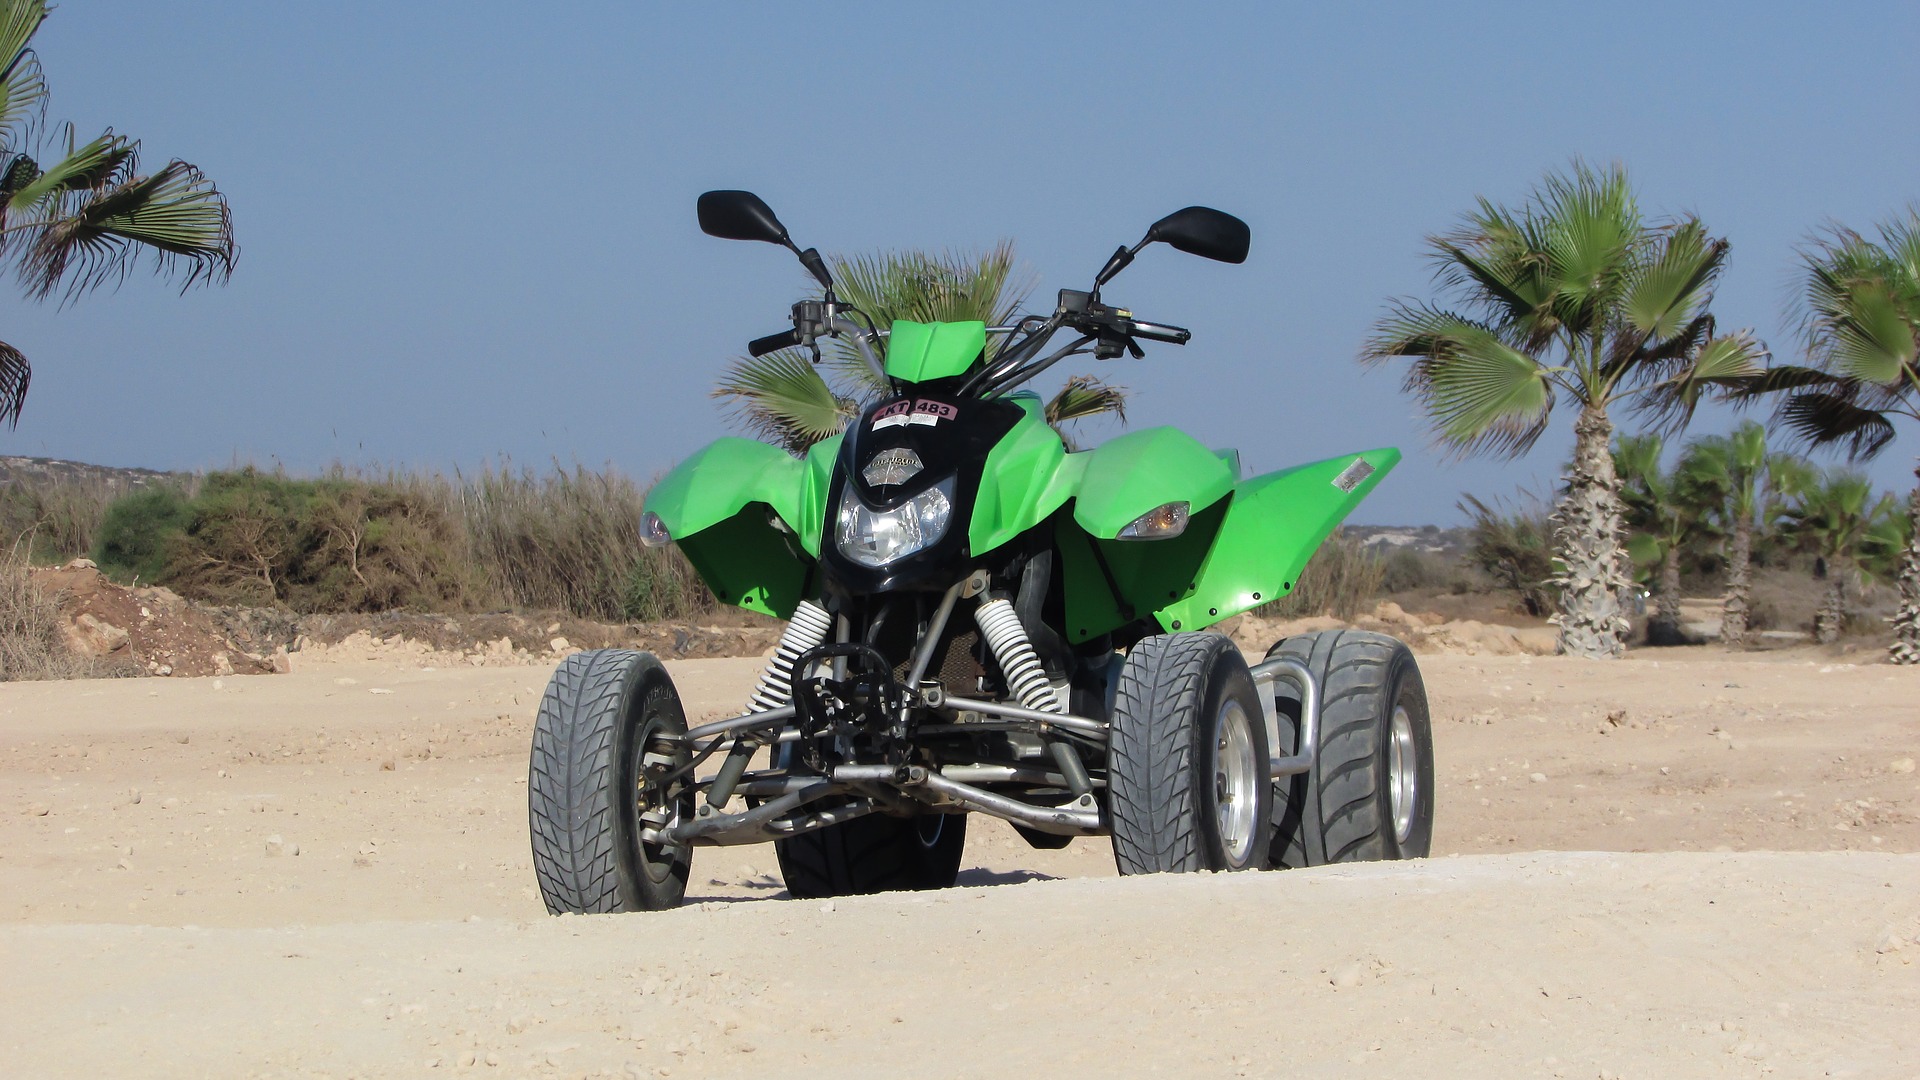 What To Look For When Buying Your First Quad Bike